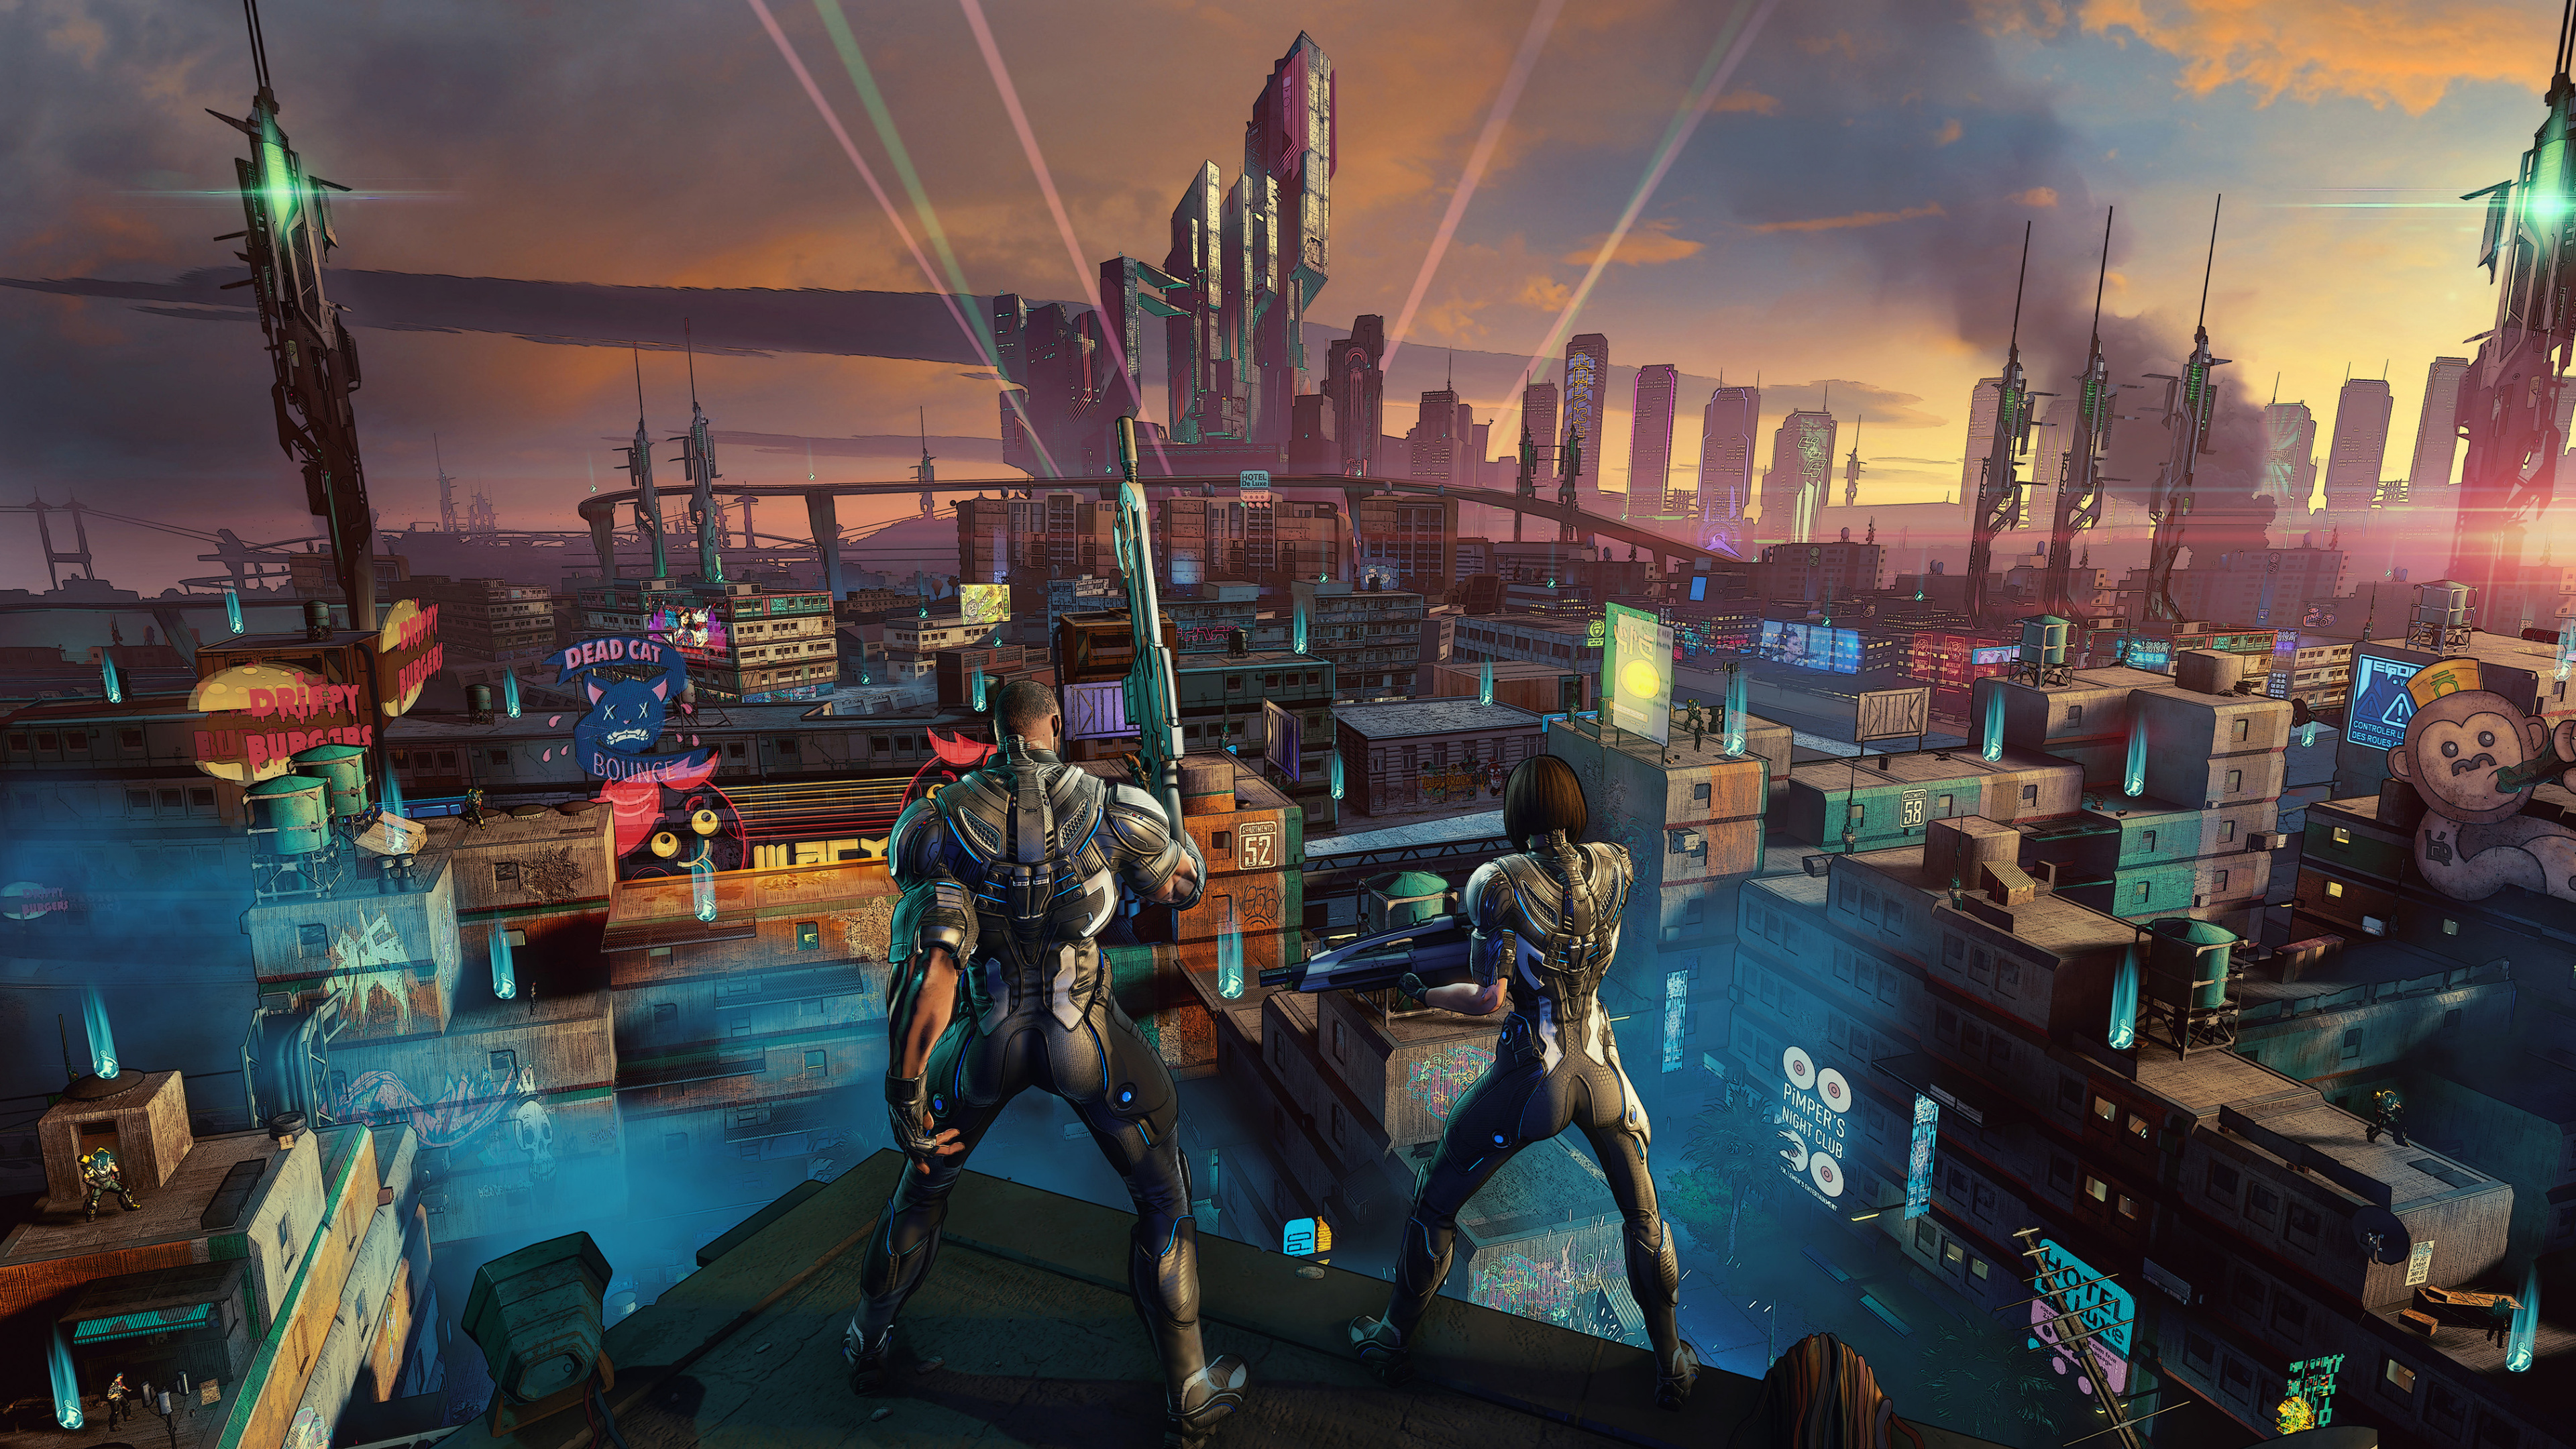 Crackdown 3, Xbox Game Studios, pc Game, Games, Strategy Video Game. Wallpaper in 3840x2160 Resolution